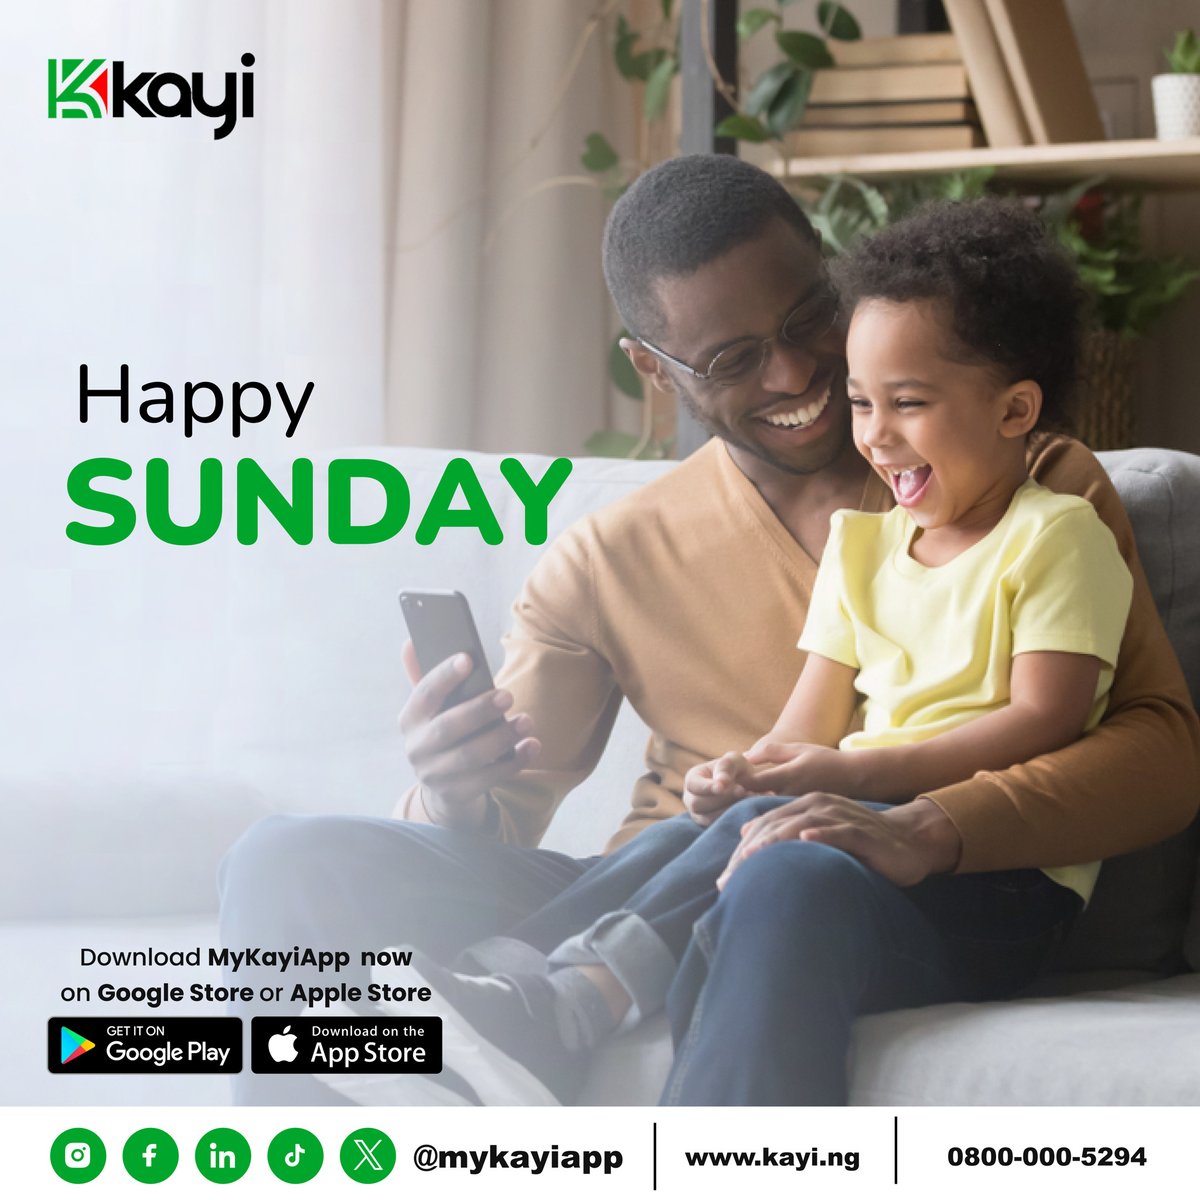 Happy Sunday, everyone! Make your day brighter with Kayiapp, your ultimate banking companion. Download now from the Play Store or Apple Store.

#MyKayiApp #NowLive #Kayiway #DownloadNow #Bankingwithoutlimits #downloadmykayiapp